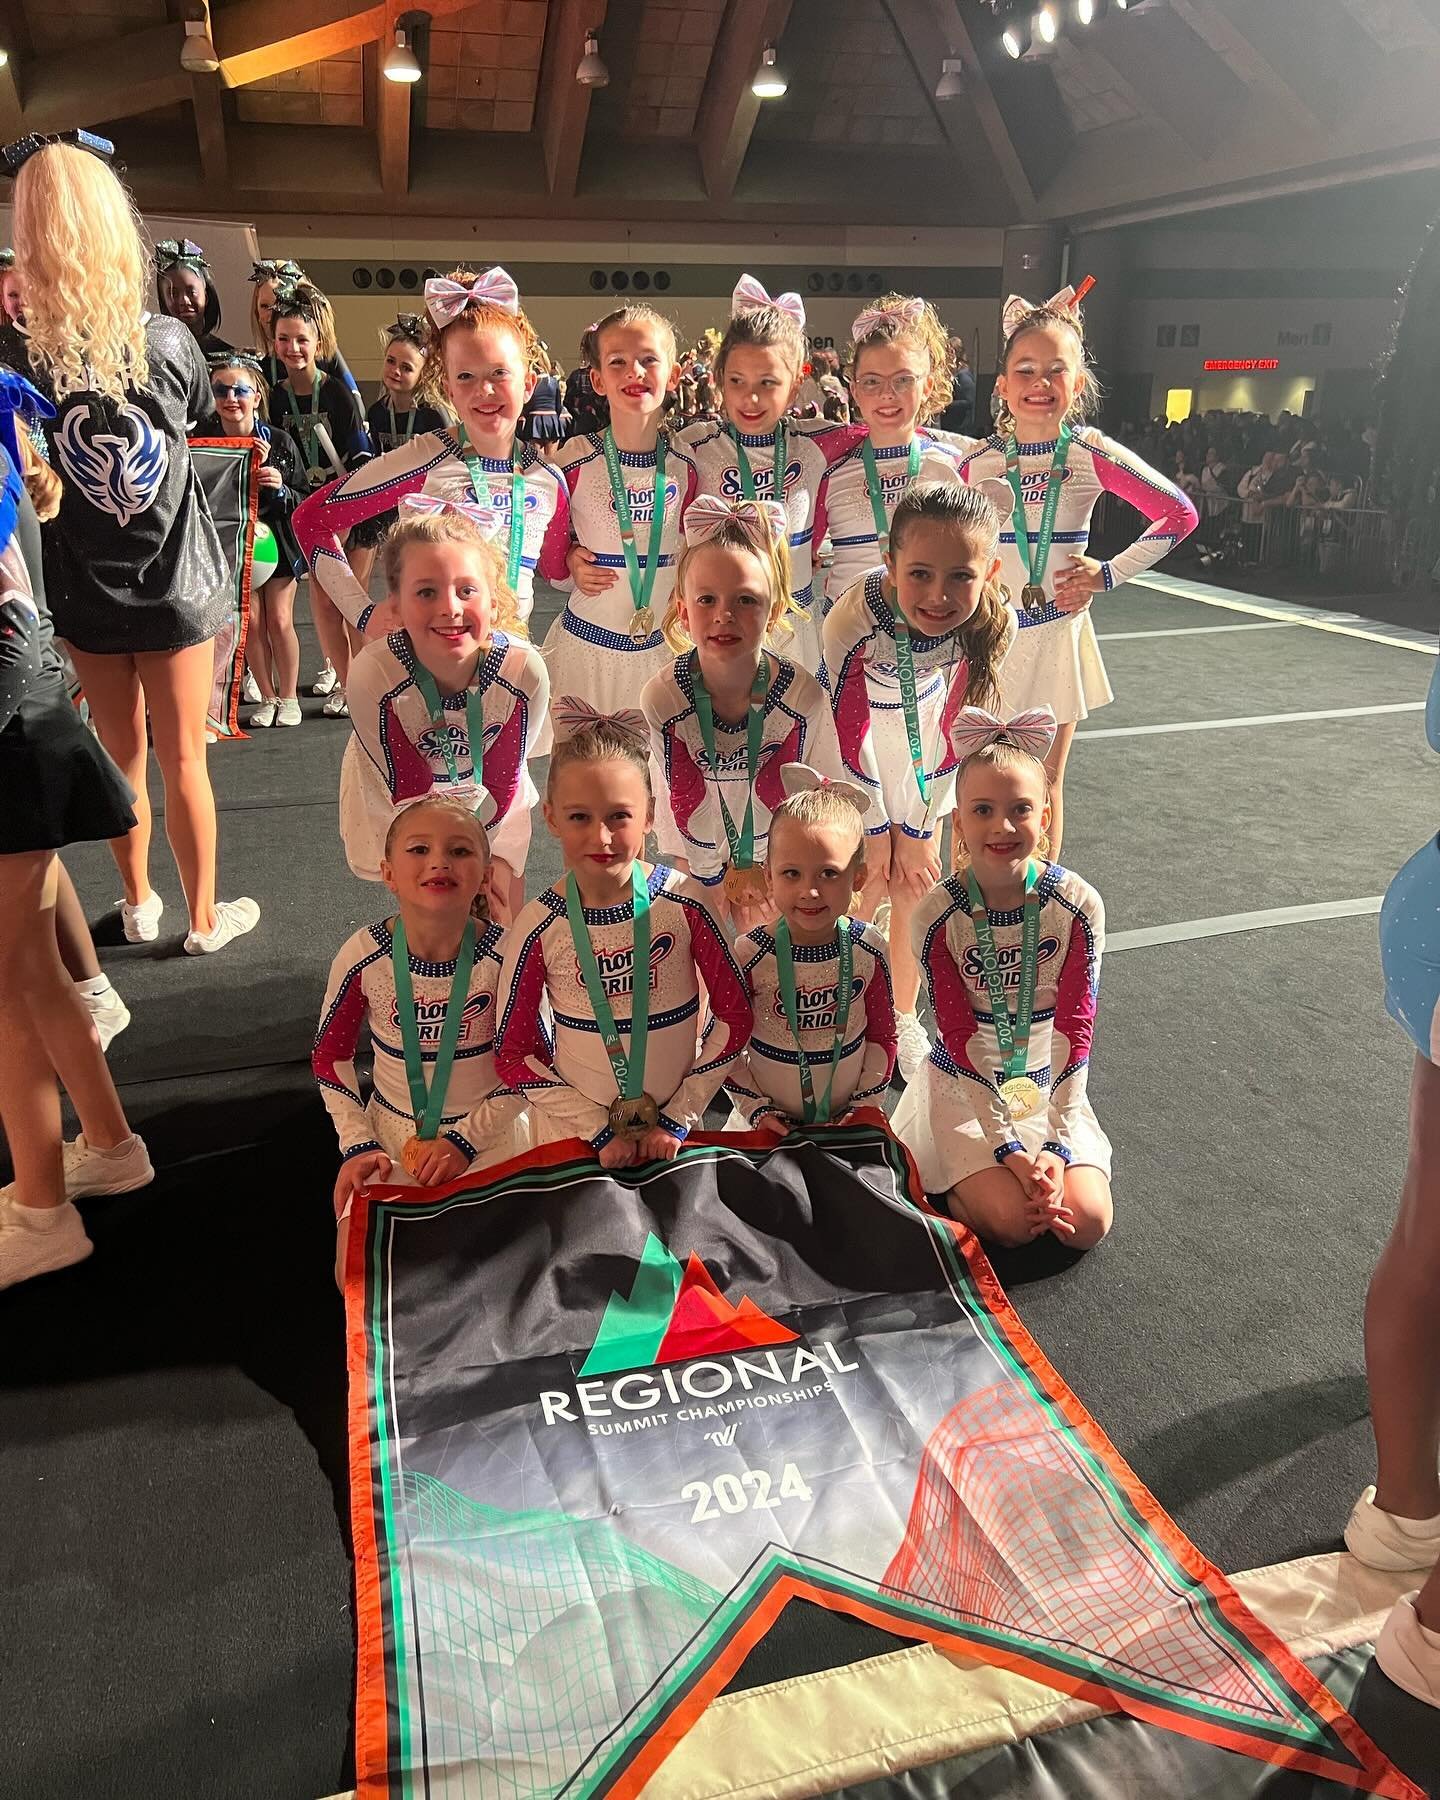 Congratulations to Shine on their highest score of the season!! They hit a beautiful hit zero routine and tied for 4th place! They have one competition left for season 9🩷💙
.
.
.
#shoreprideallstars #shorepridestrong #shoreproud #smallgymstrong #che